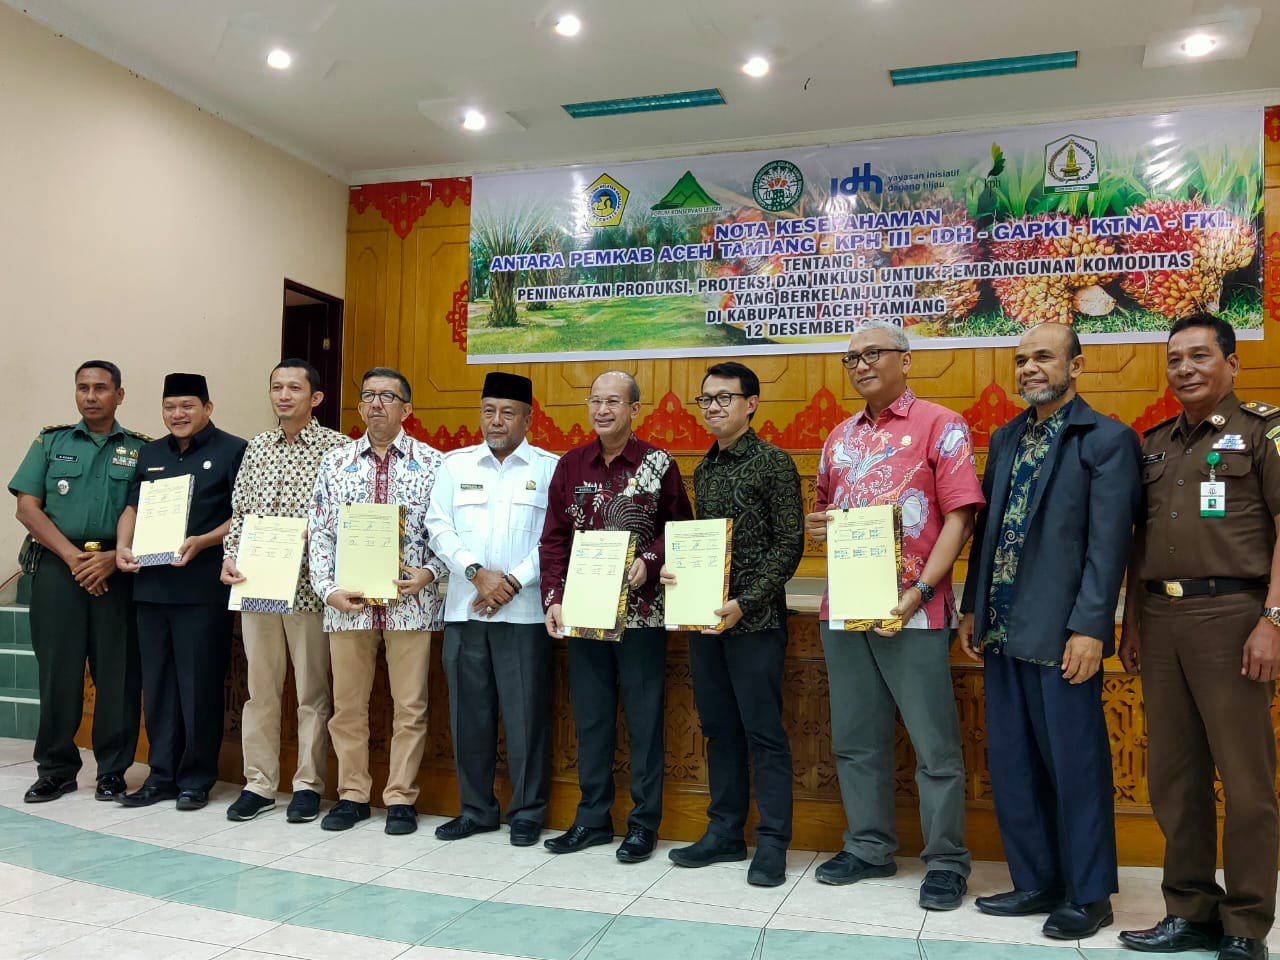 PPI-Compact-signing-Aceh-Tiamang-december-12019.jpg